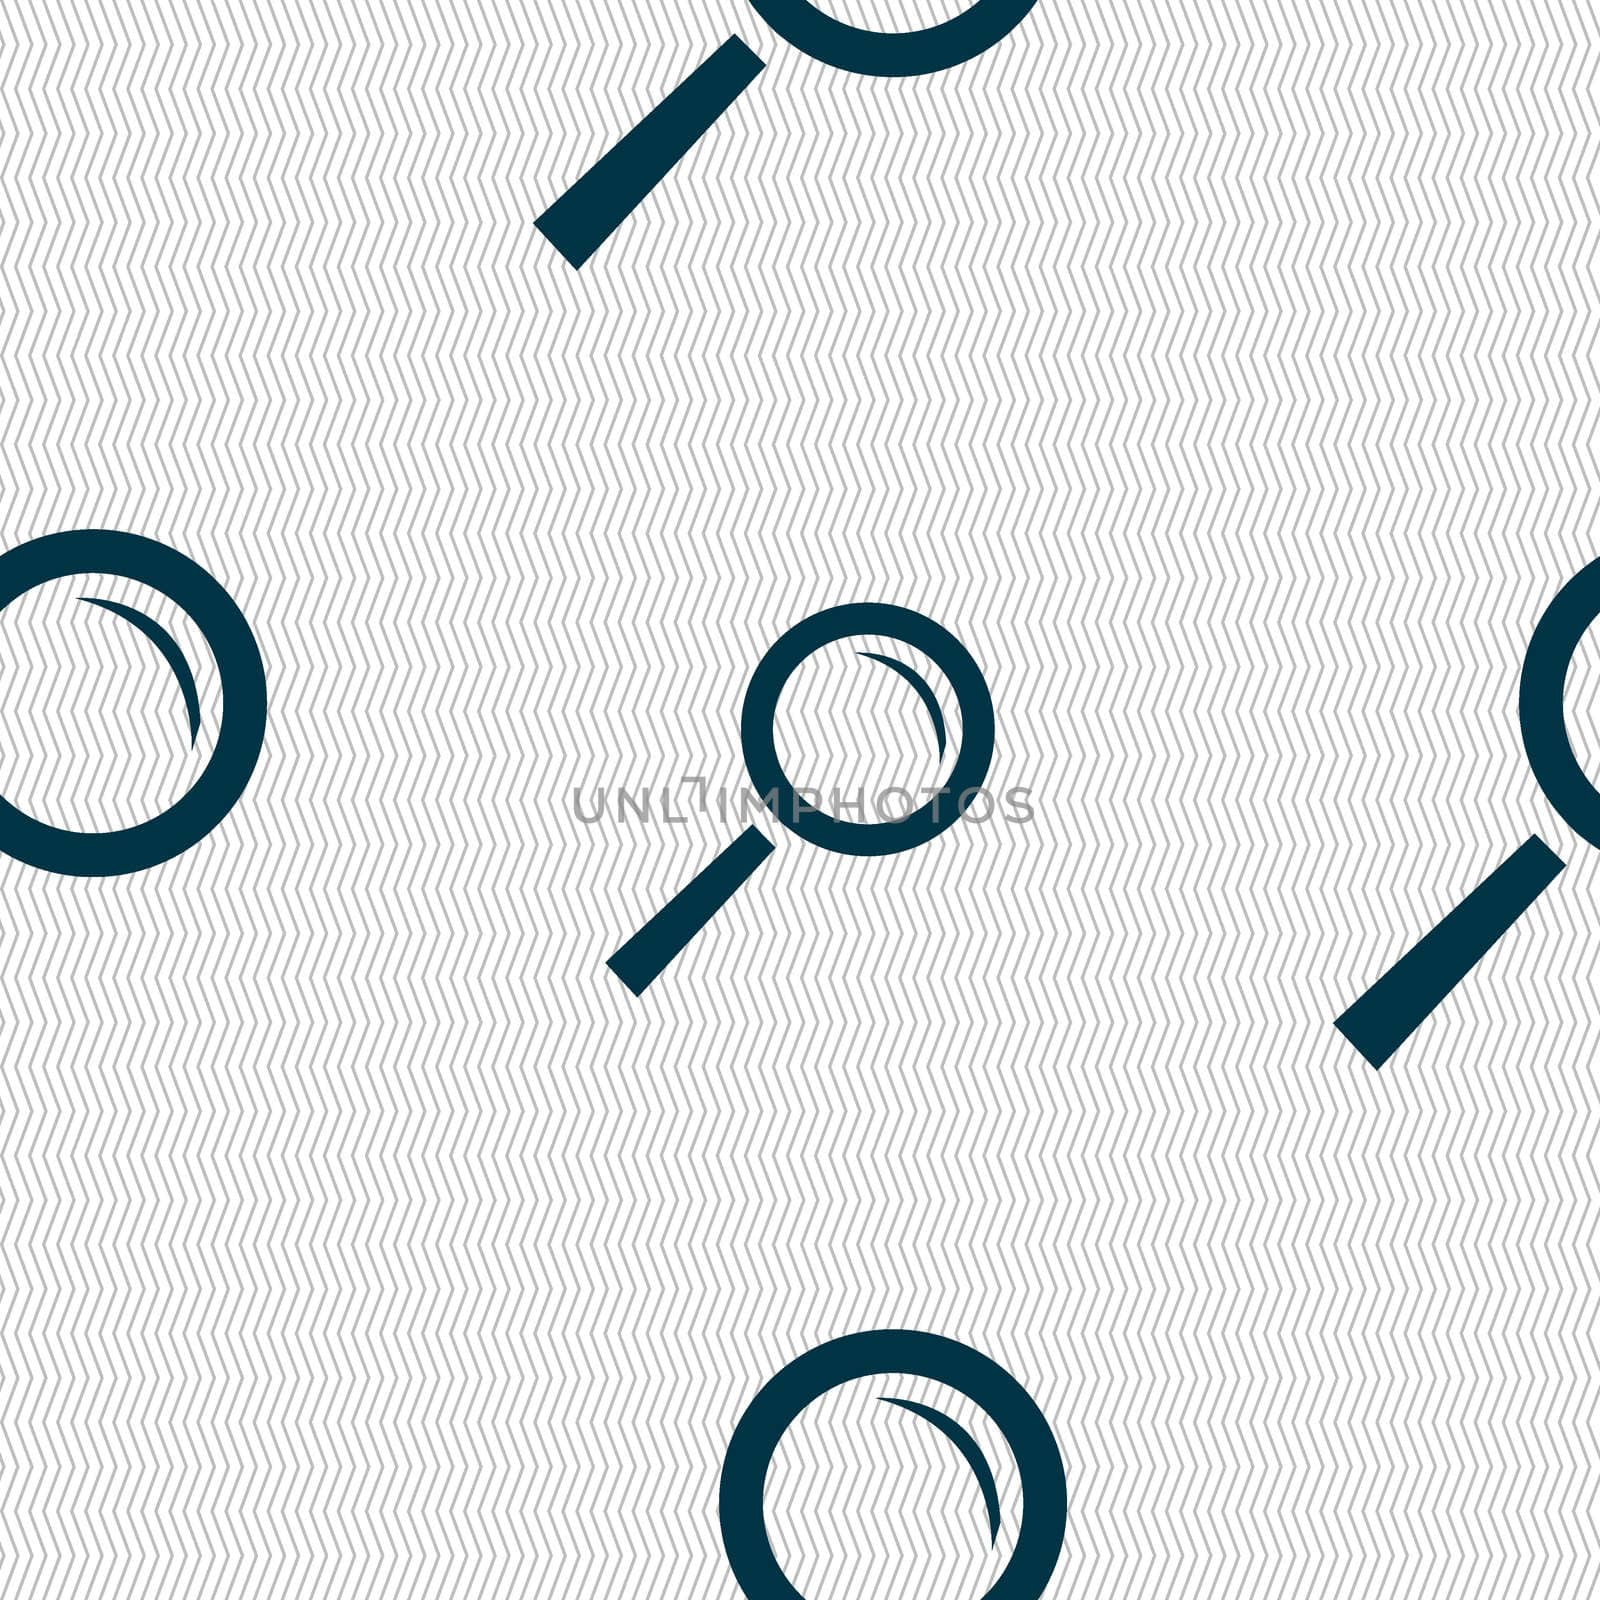 Magnifier glass sign icon. Zoom tool button. Navigation search symbol. Seamless abstract background with geometric shapes. illustration